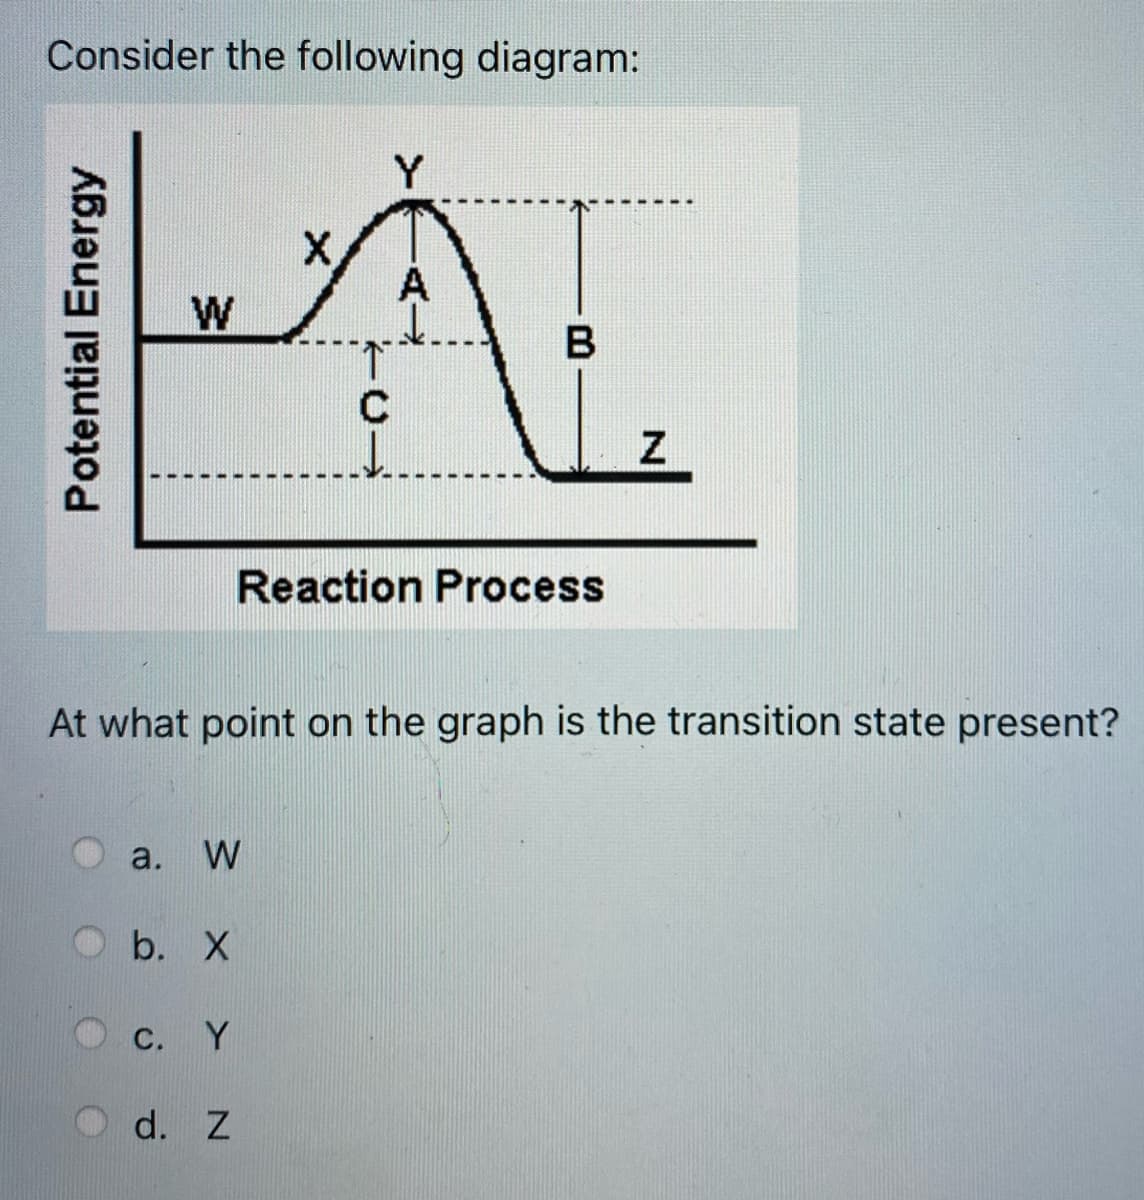 Consider the following diagram:
Y
W
B
Reaction Process
At what point on the graph is the transition state present?
a.
W
b. X
С.
Y
d. Z
Potential Energy
